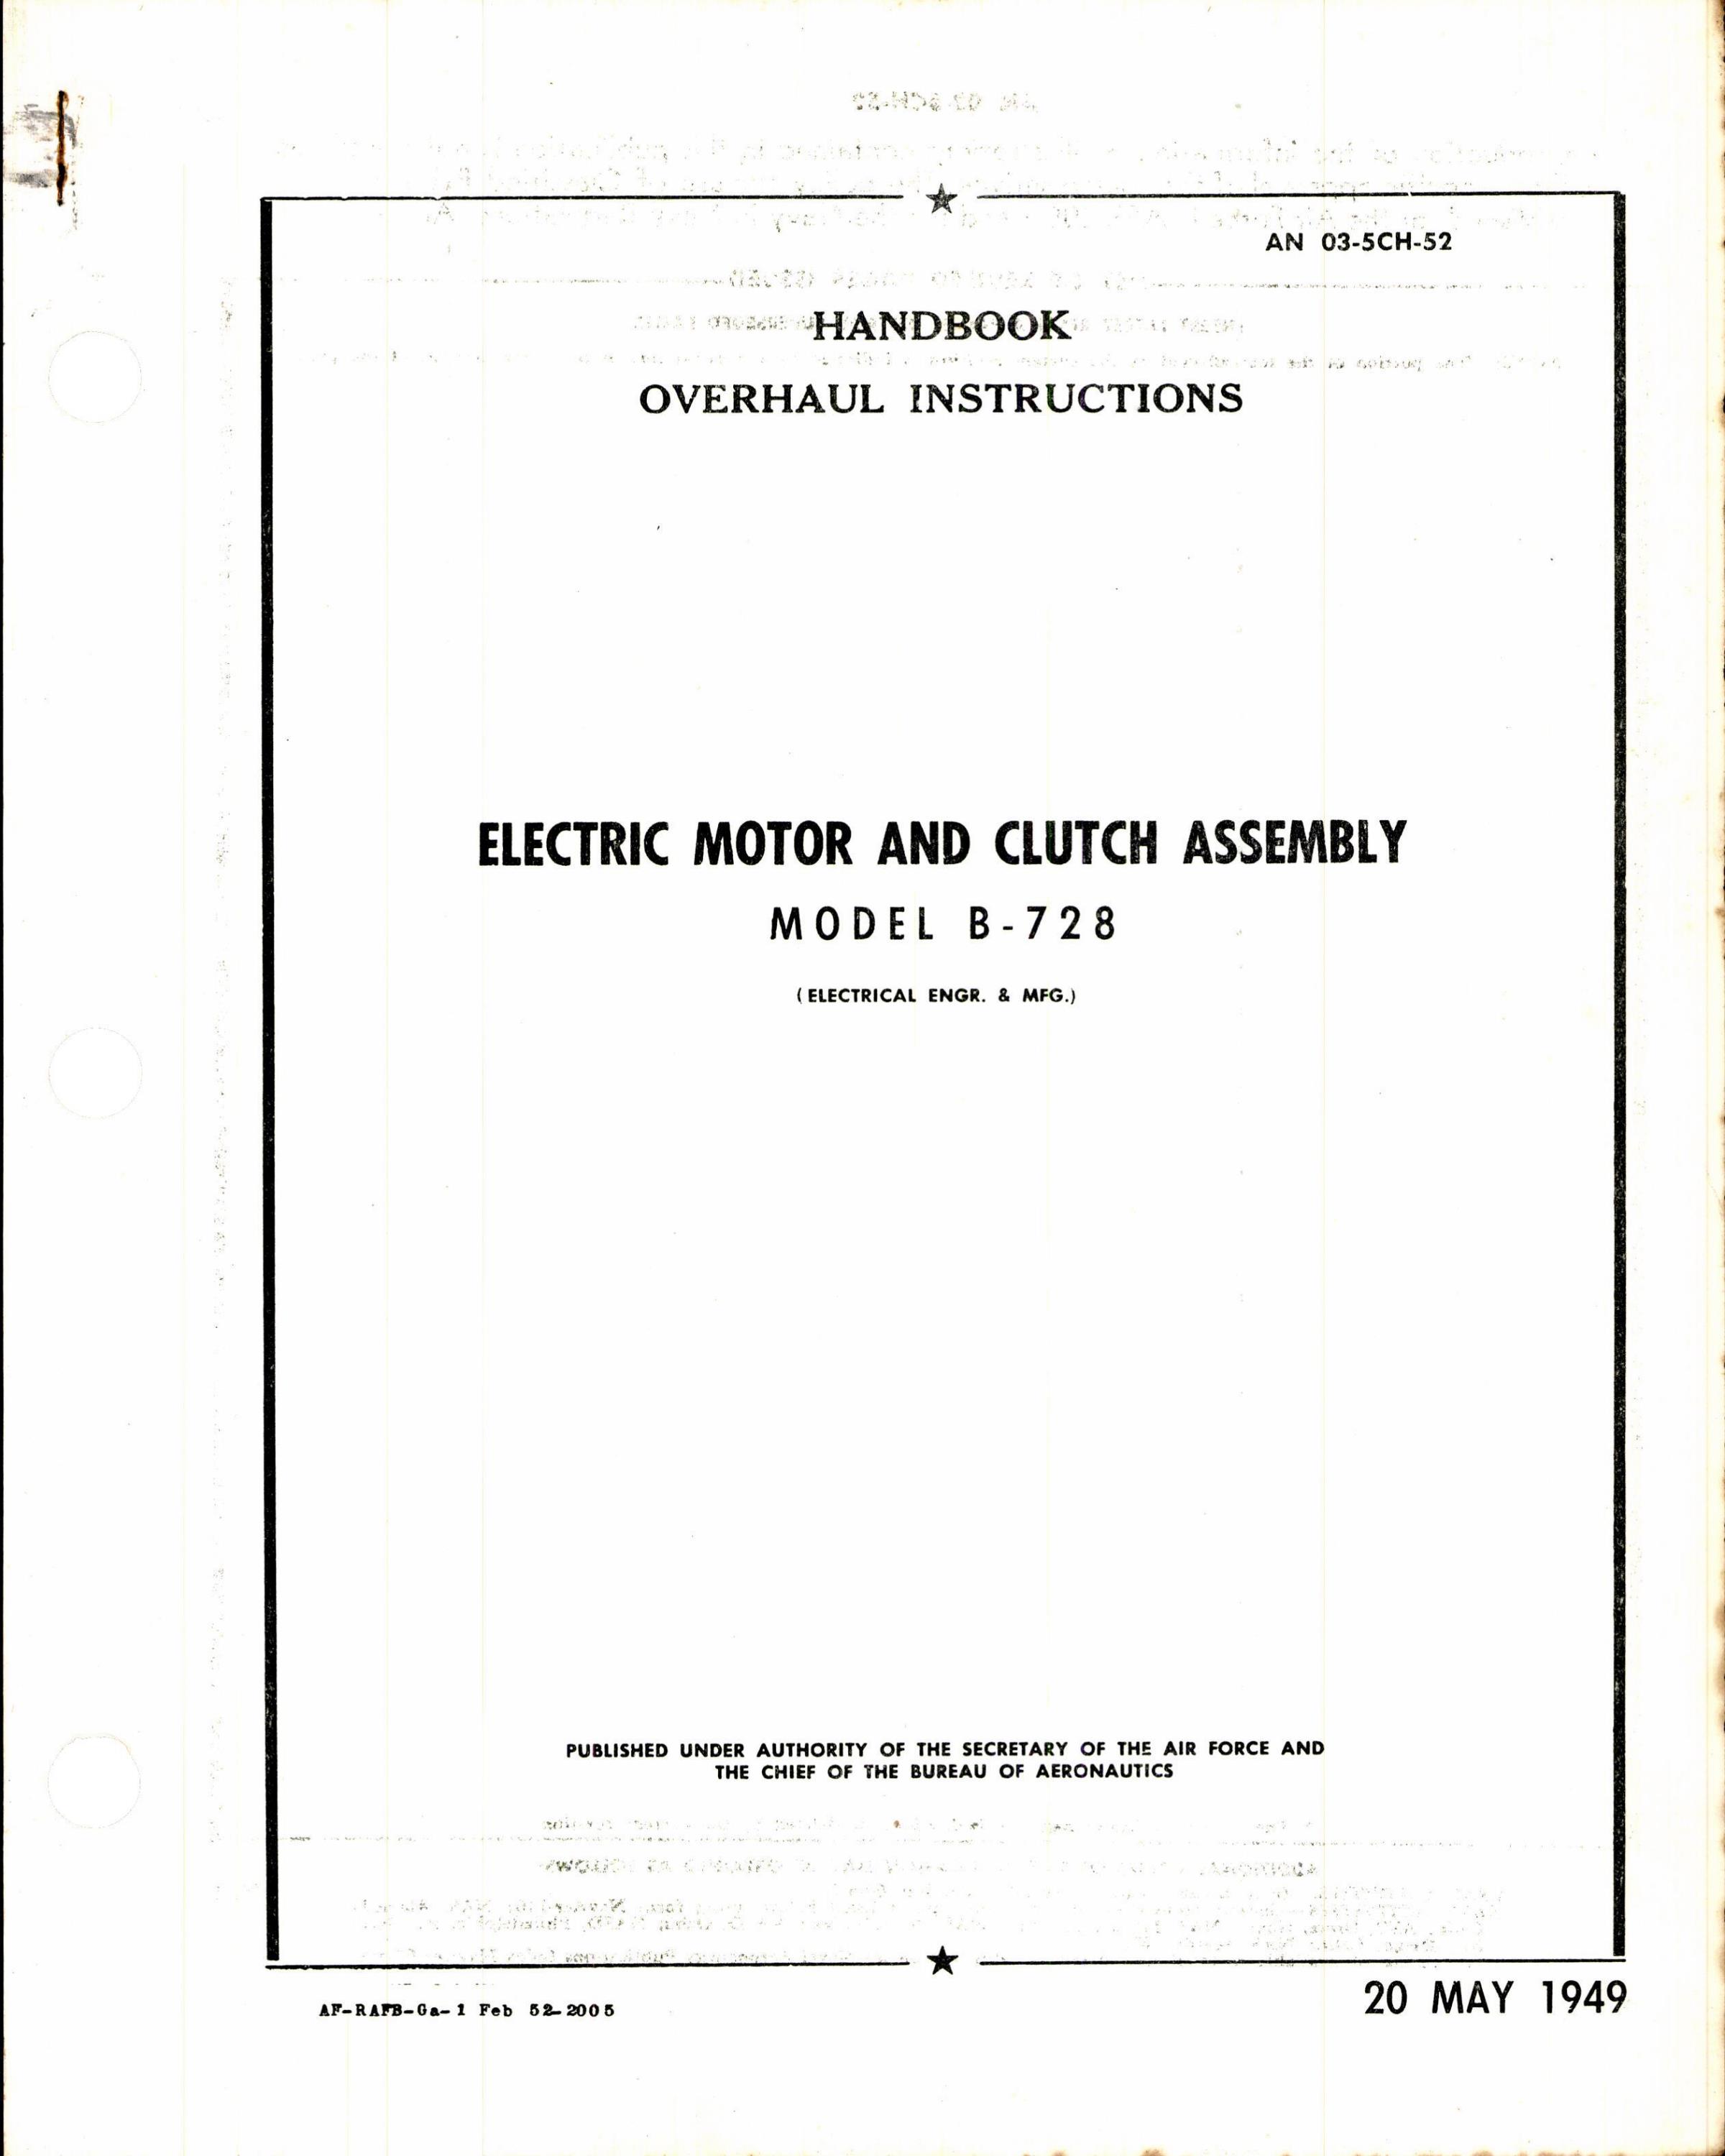 Sample page 1 from AirCorps Library document: Overhaul Instructions for Electric Motor and Clutch Assembly Model B-728